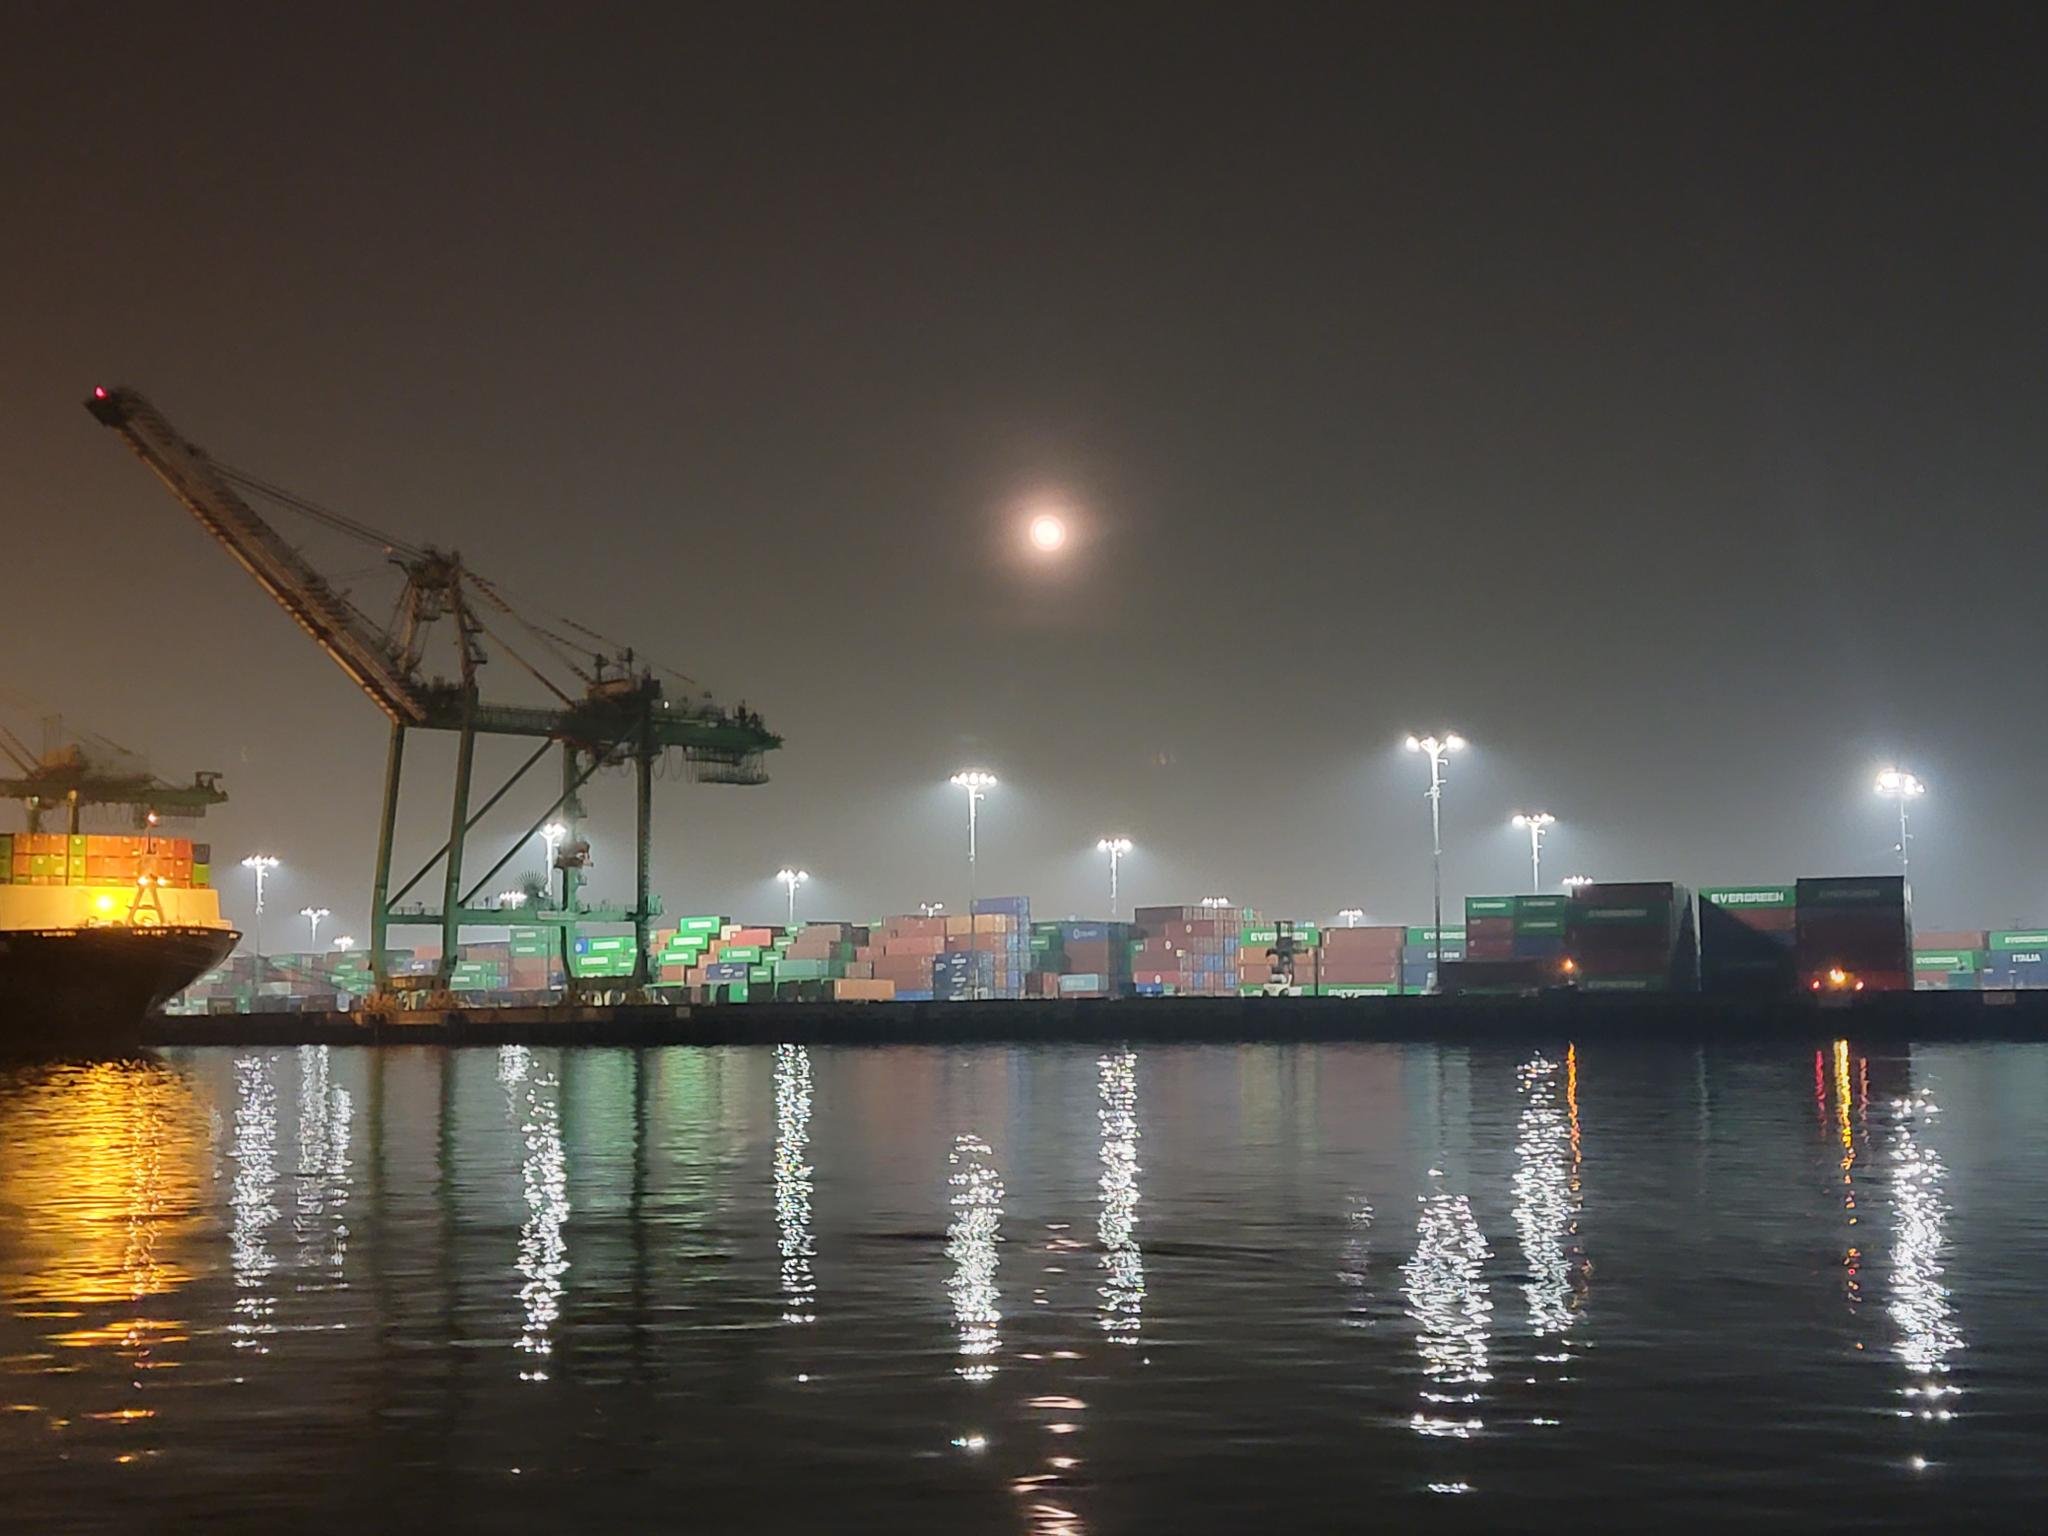 A series of shipping containers on a dock with floodlamps illuminating them.